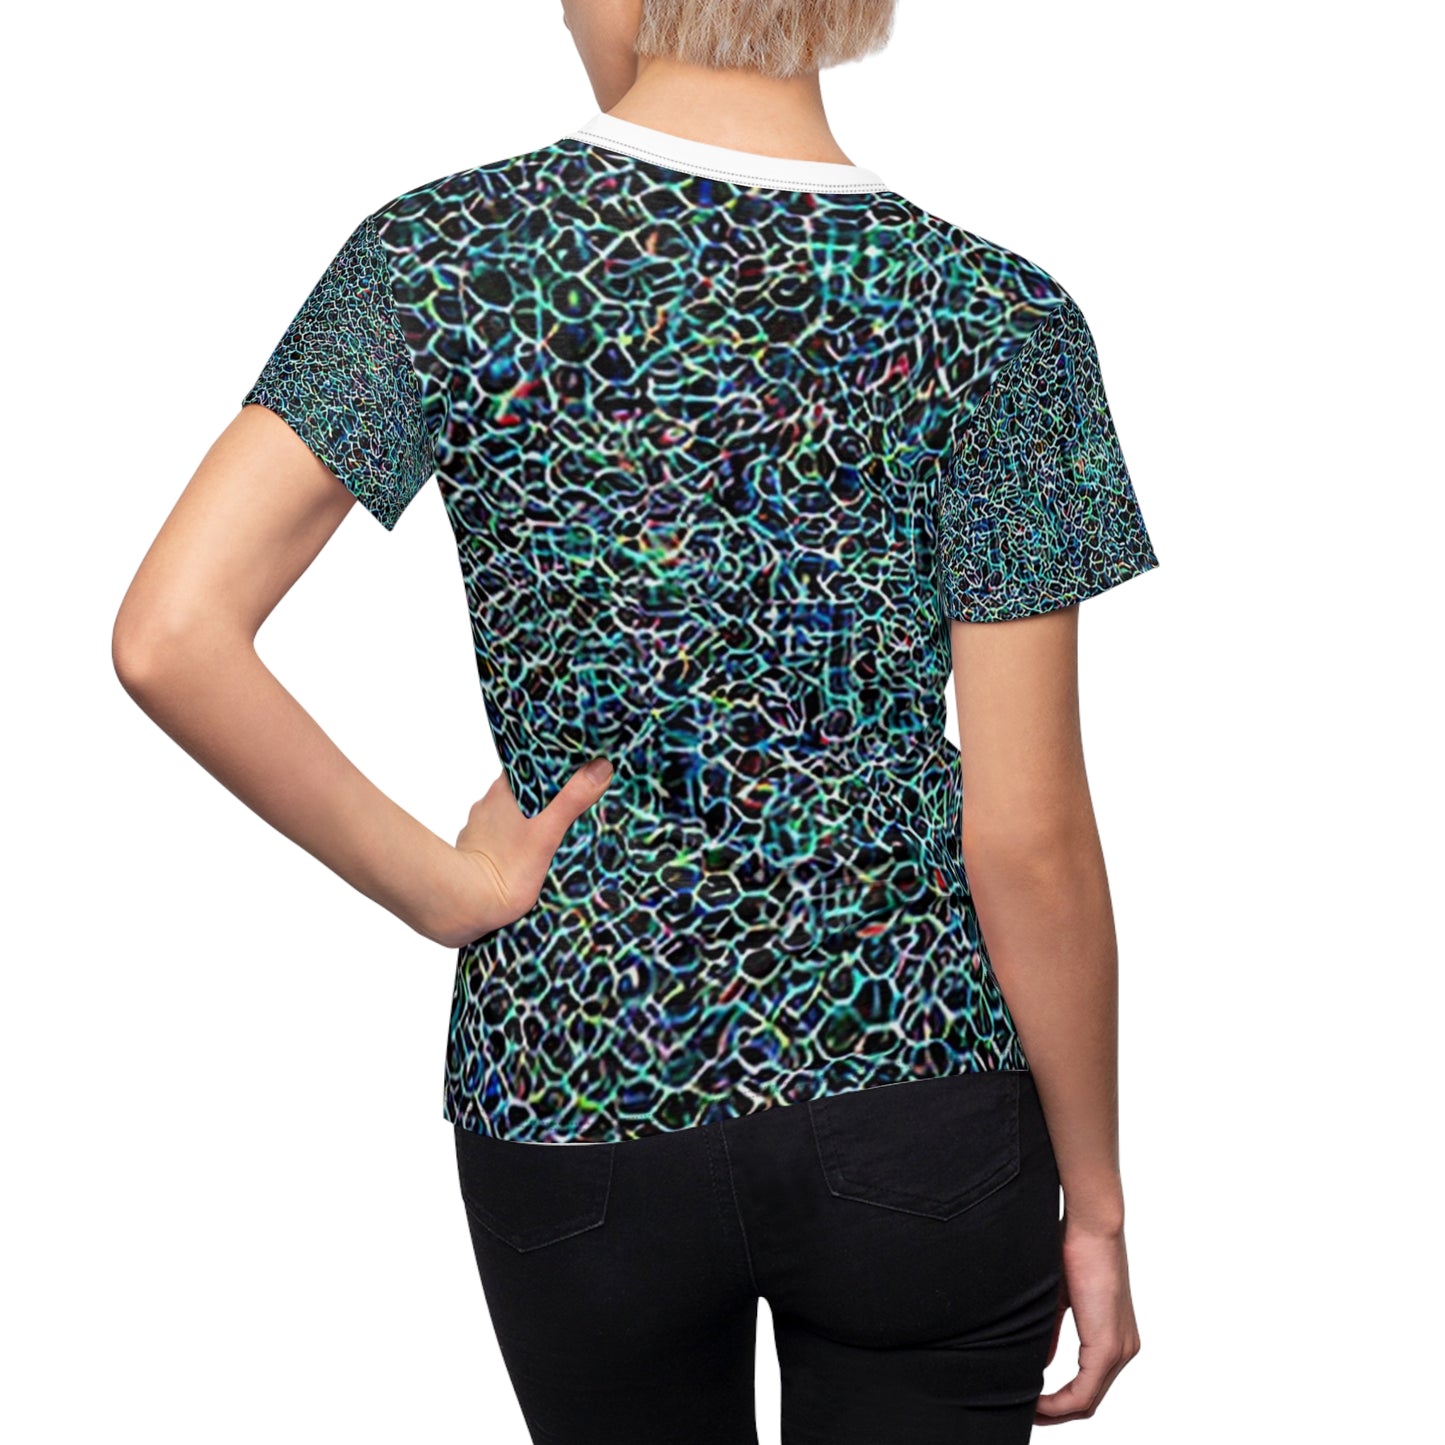 Anti Facial Recognition / Adversarial Pattern Women's Cut & Sew Tee